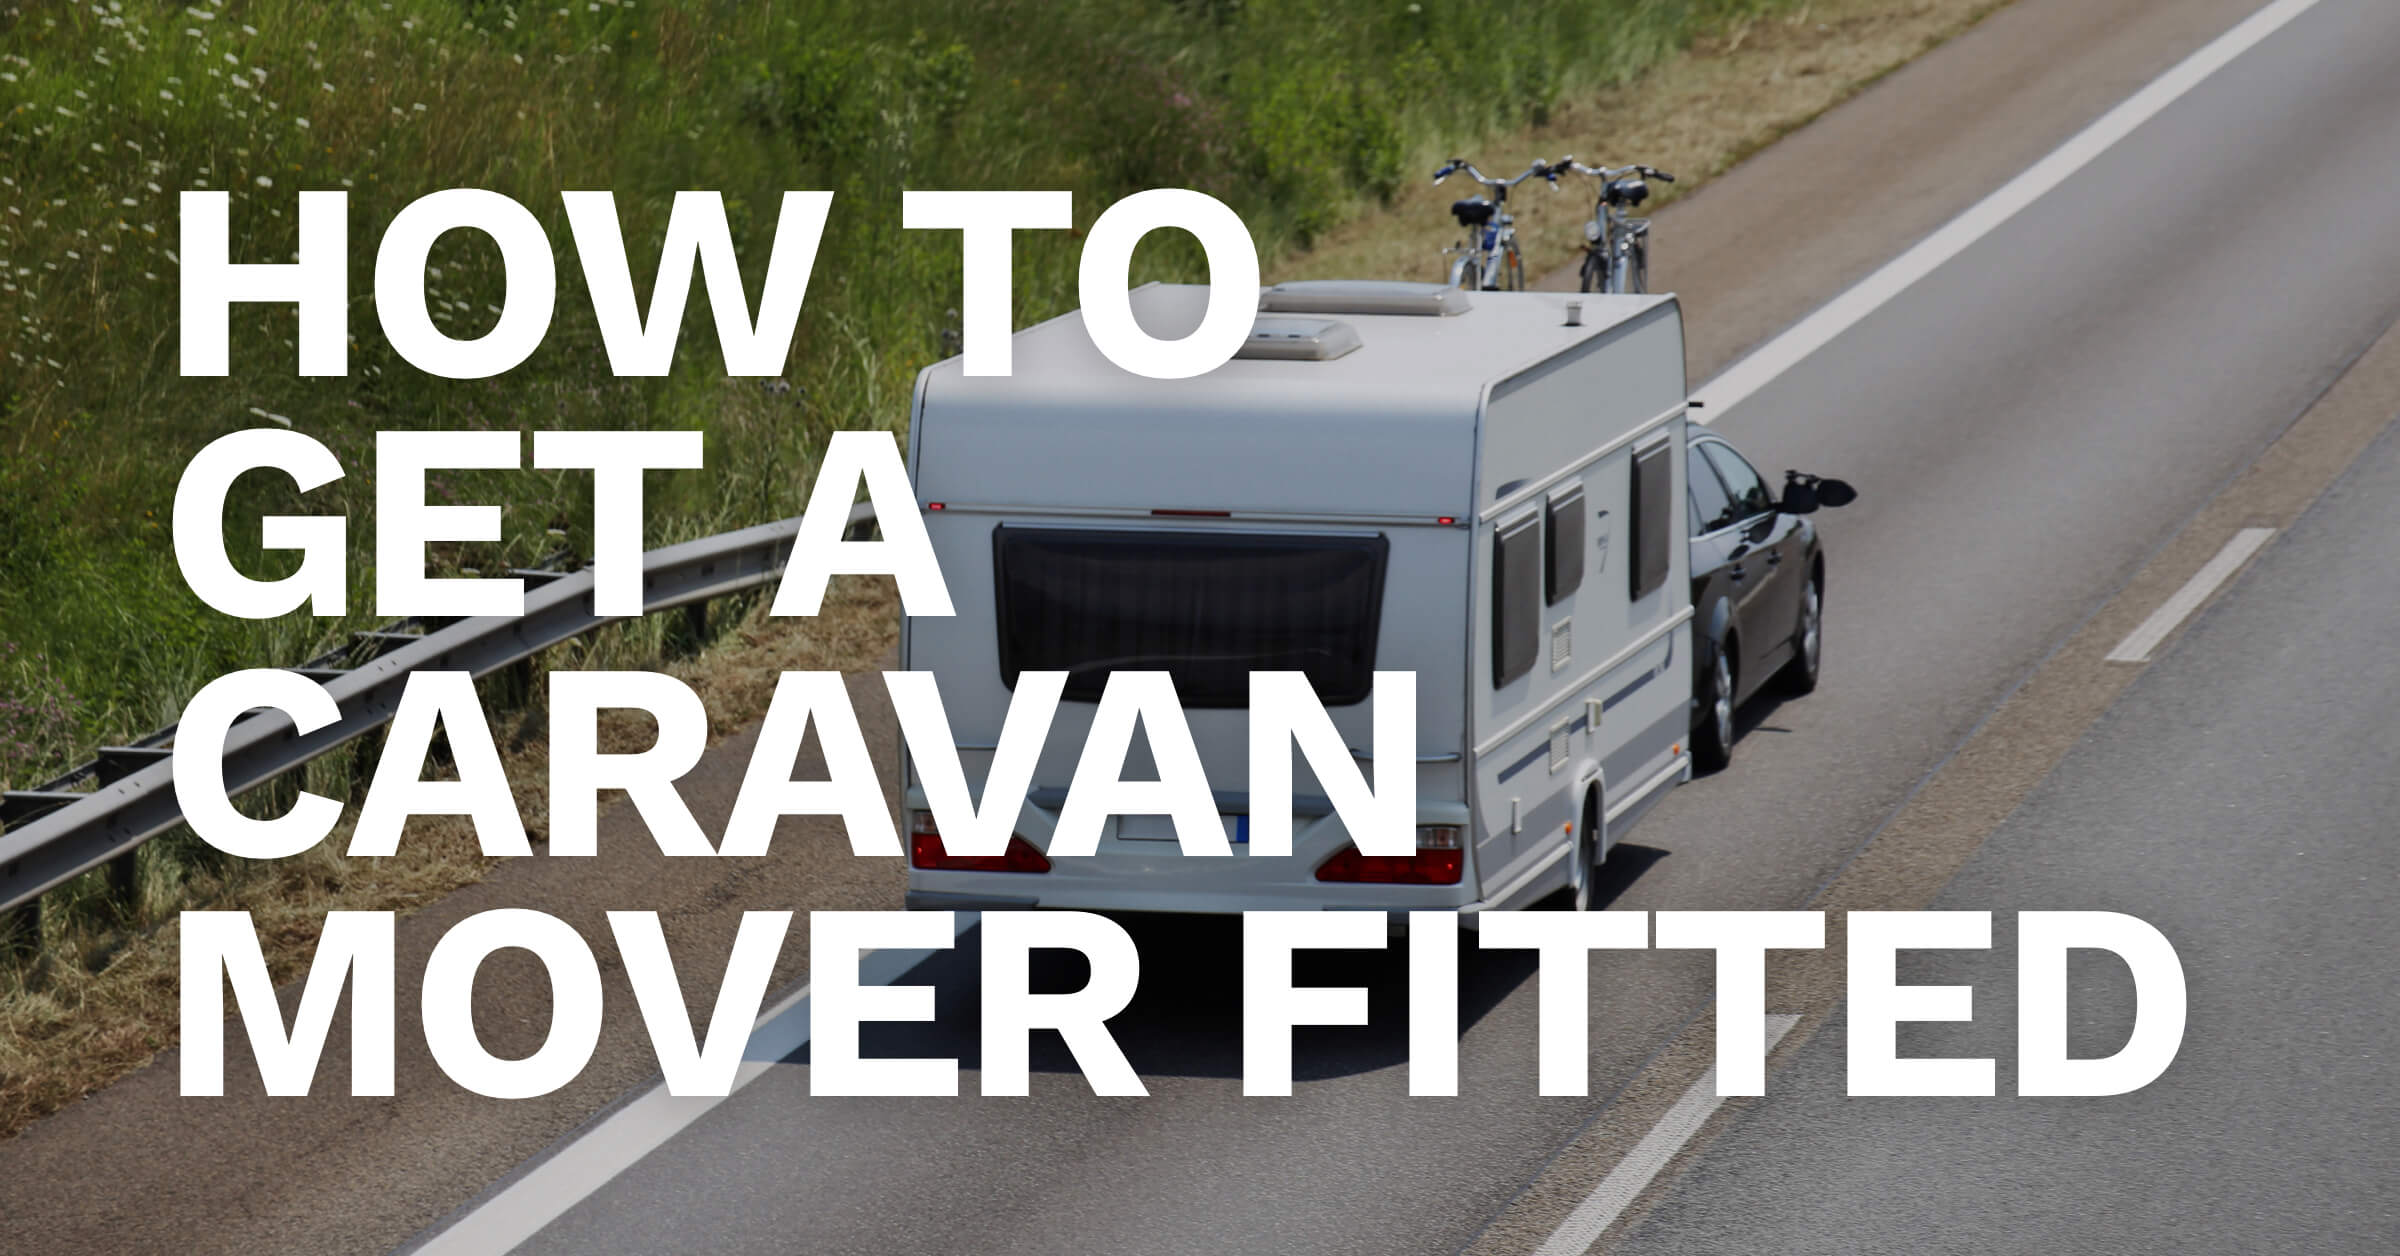 How To Get A Caravan Mover Fitted